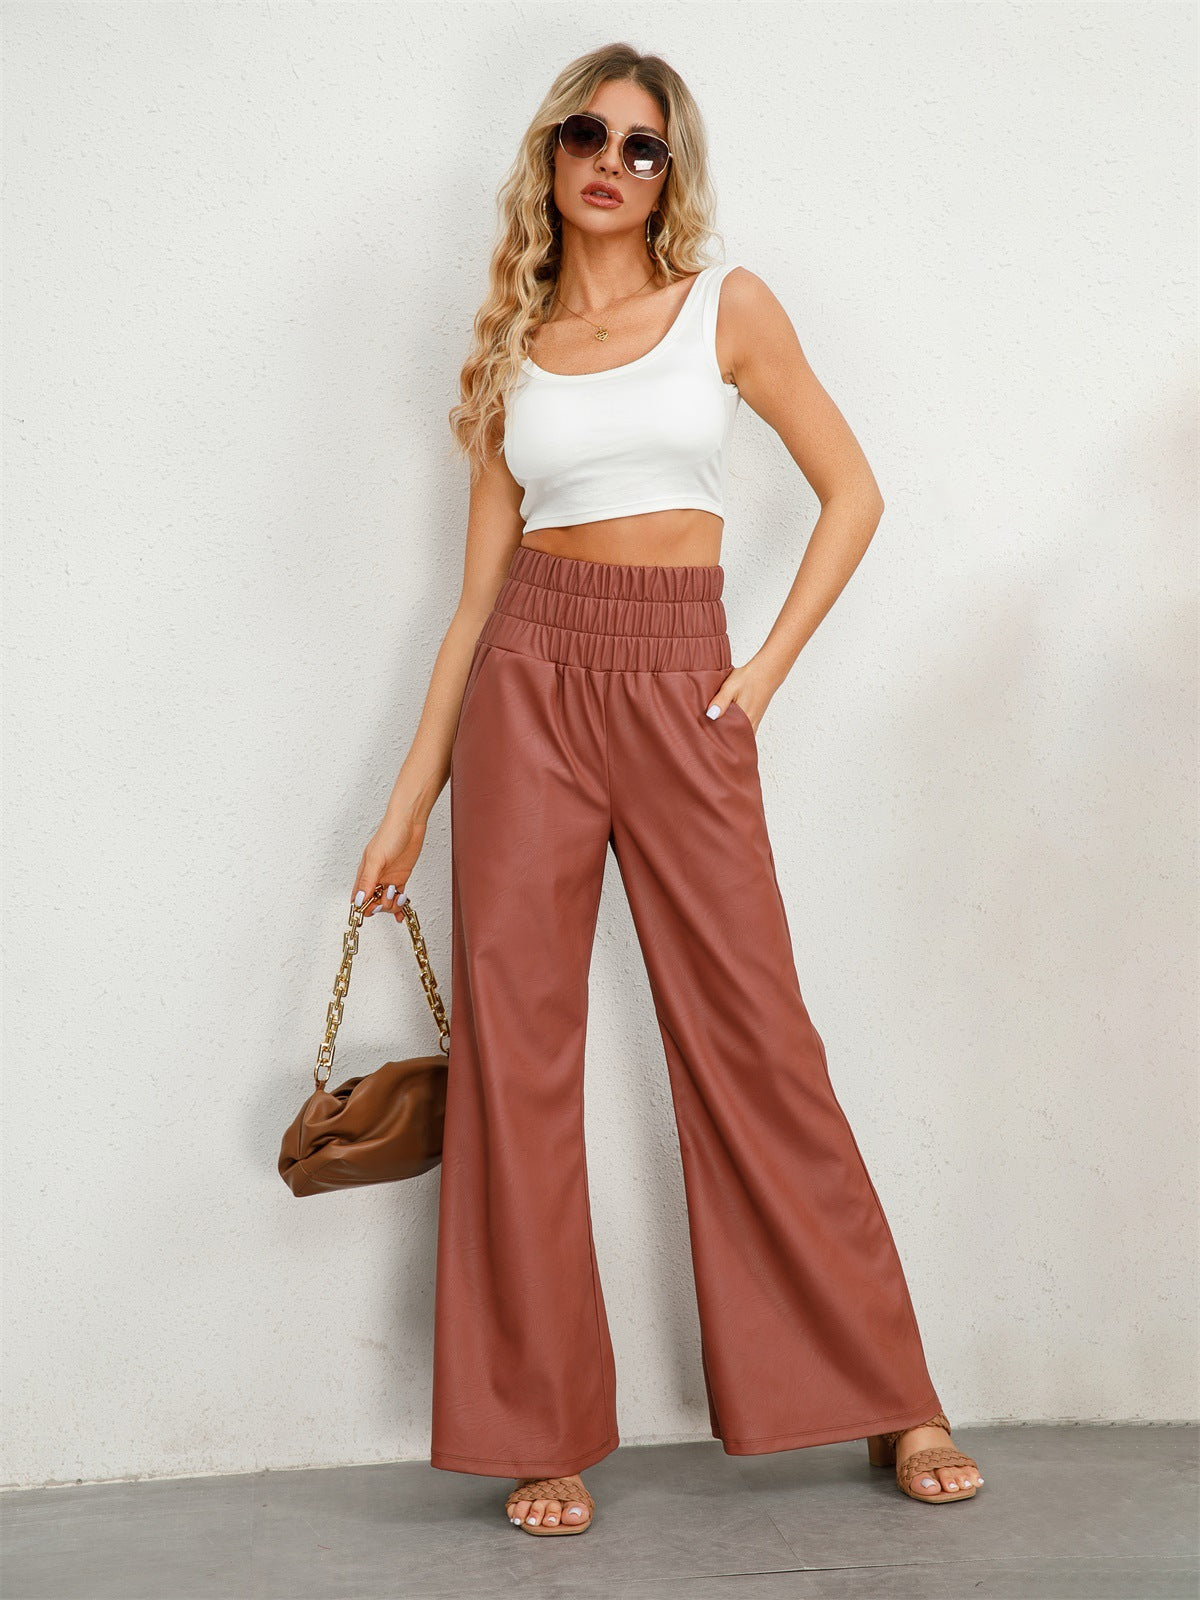 leather bell bottom pants for Women